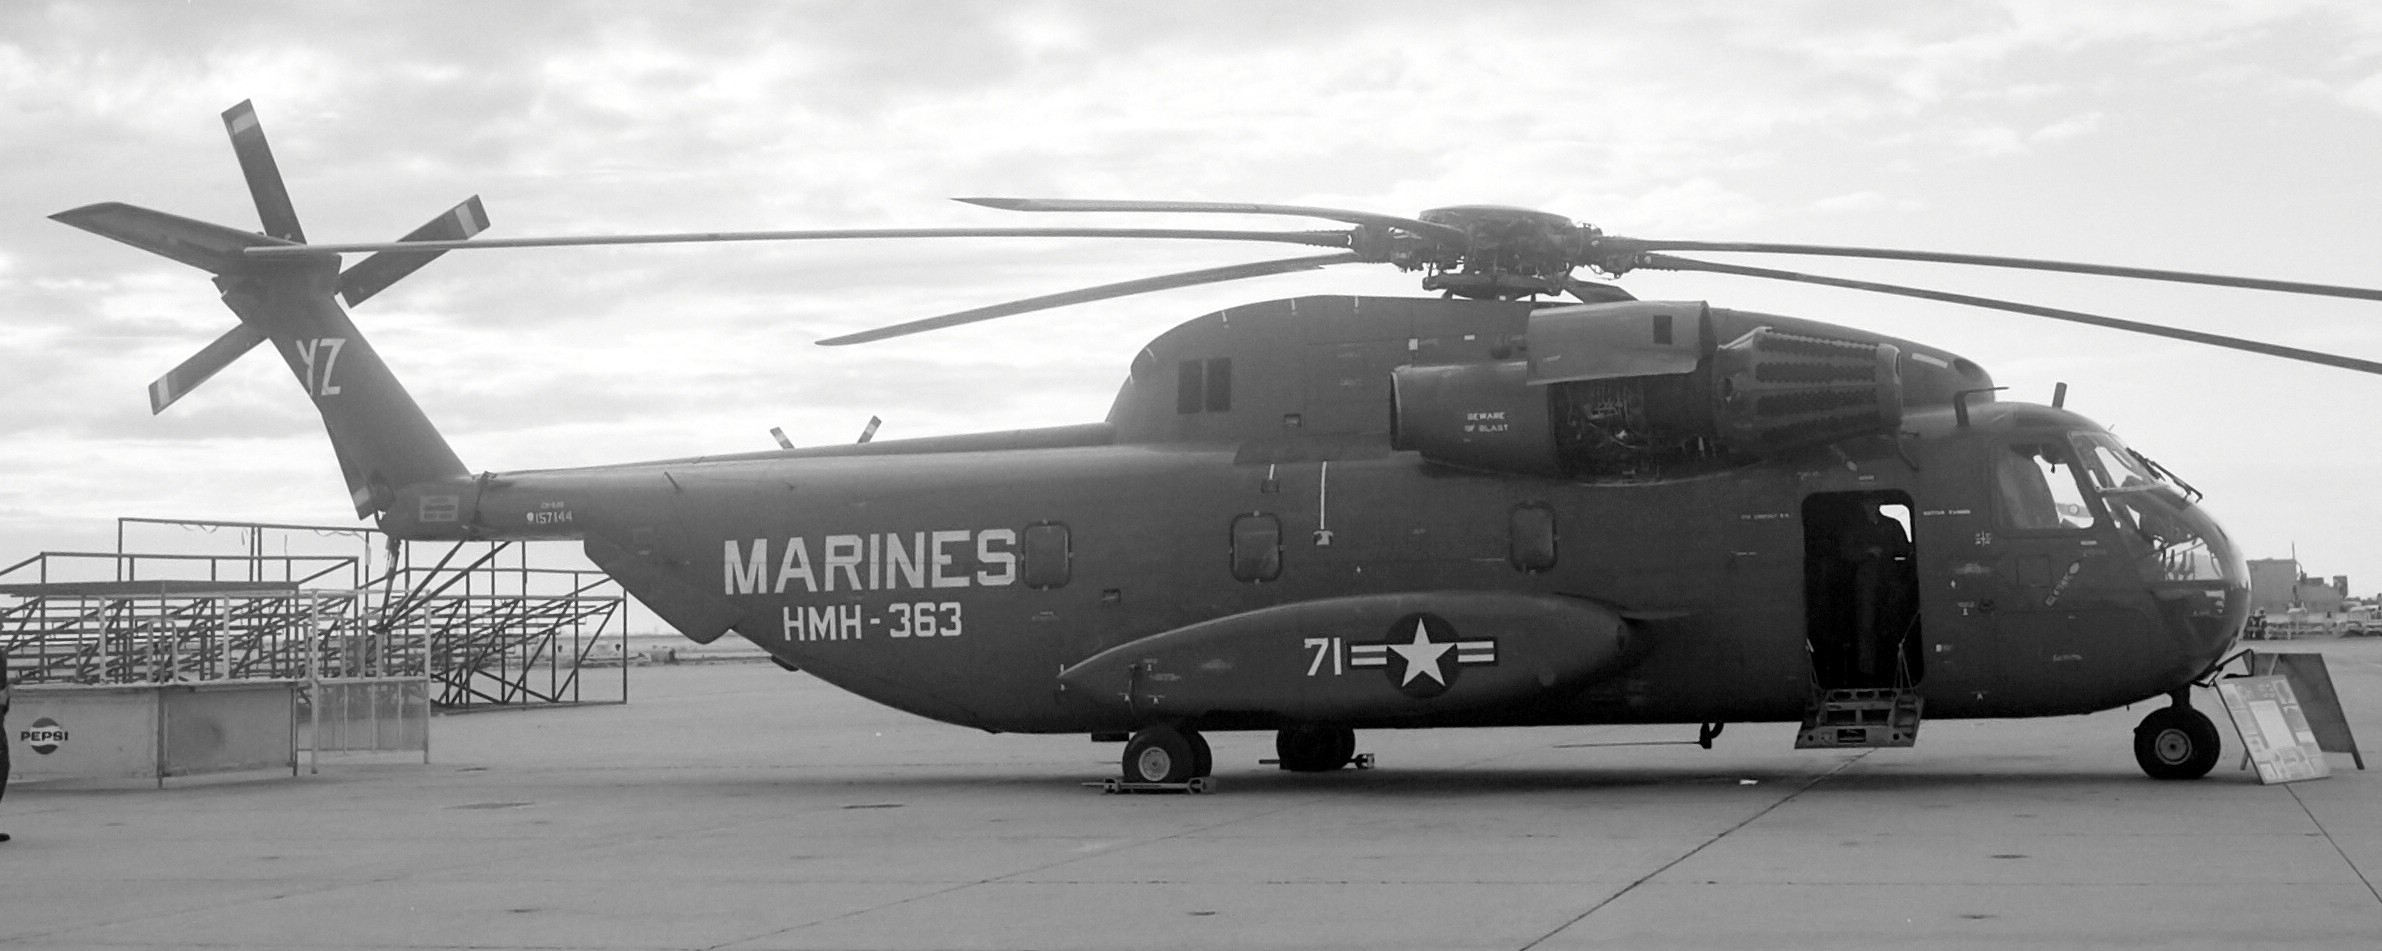 hmh-363 red lions marine heavy helicopter squadron usmc sikorsky ch-53d sea stallion 43